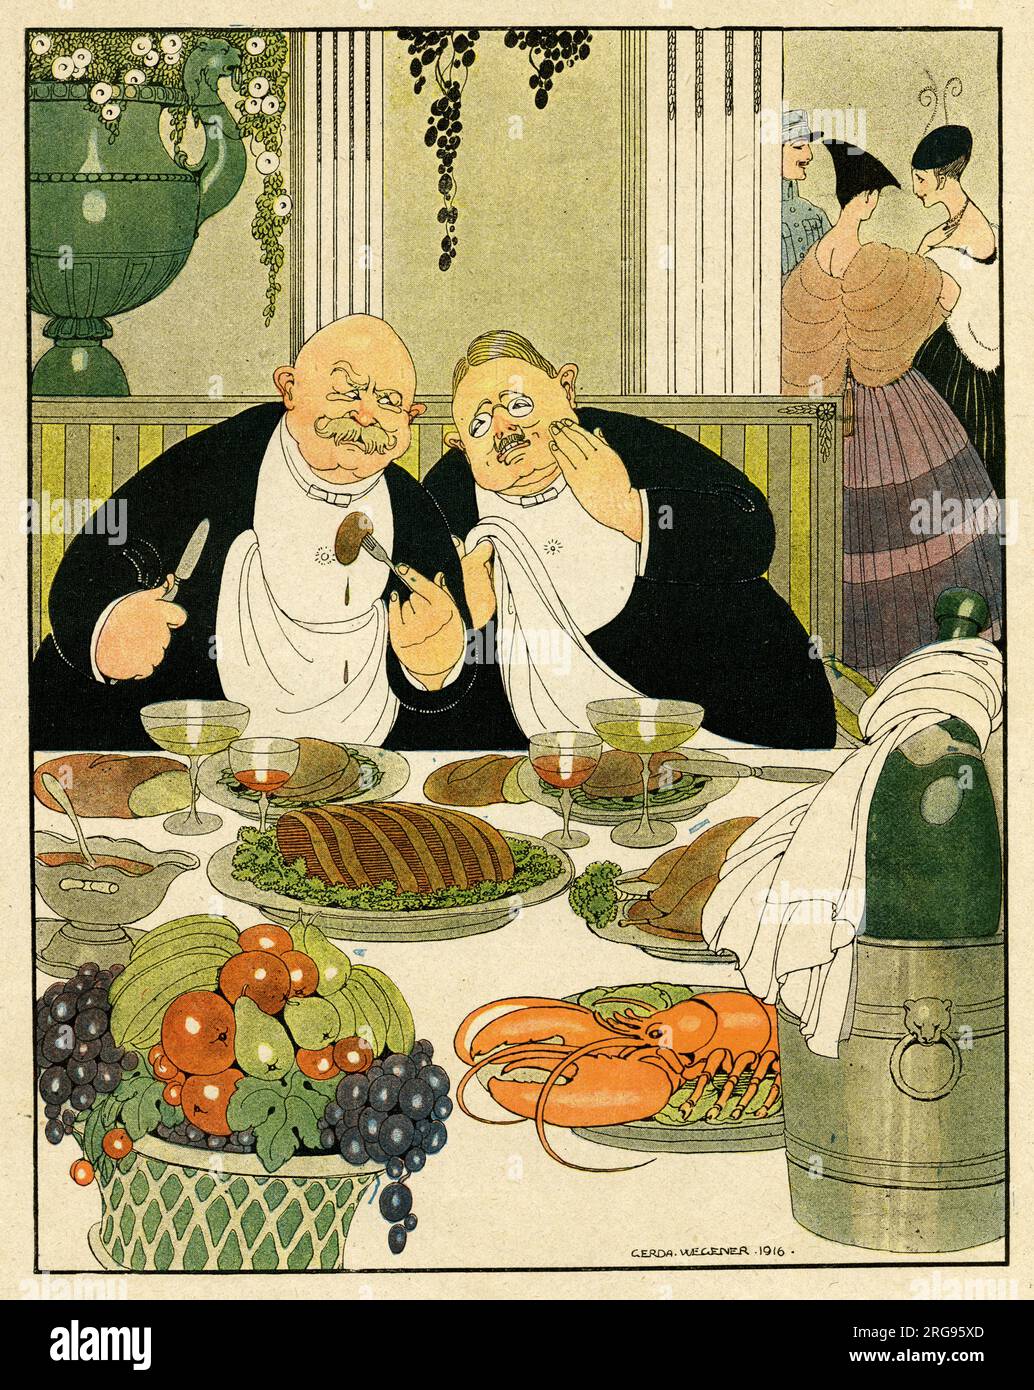 Cartoon, Two German spies.  Two fat men at a table laden with food agree that it's worth being spies and risking their lives, when they can eat so well. Stock Photo